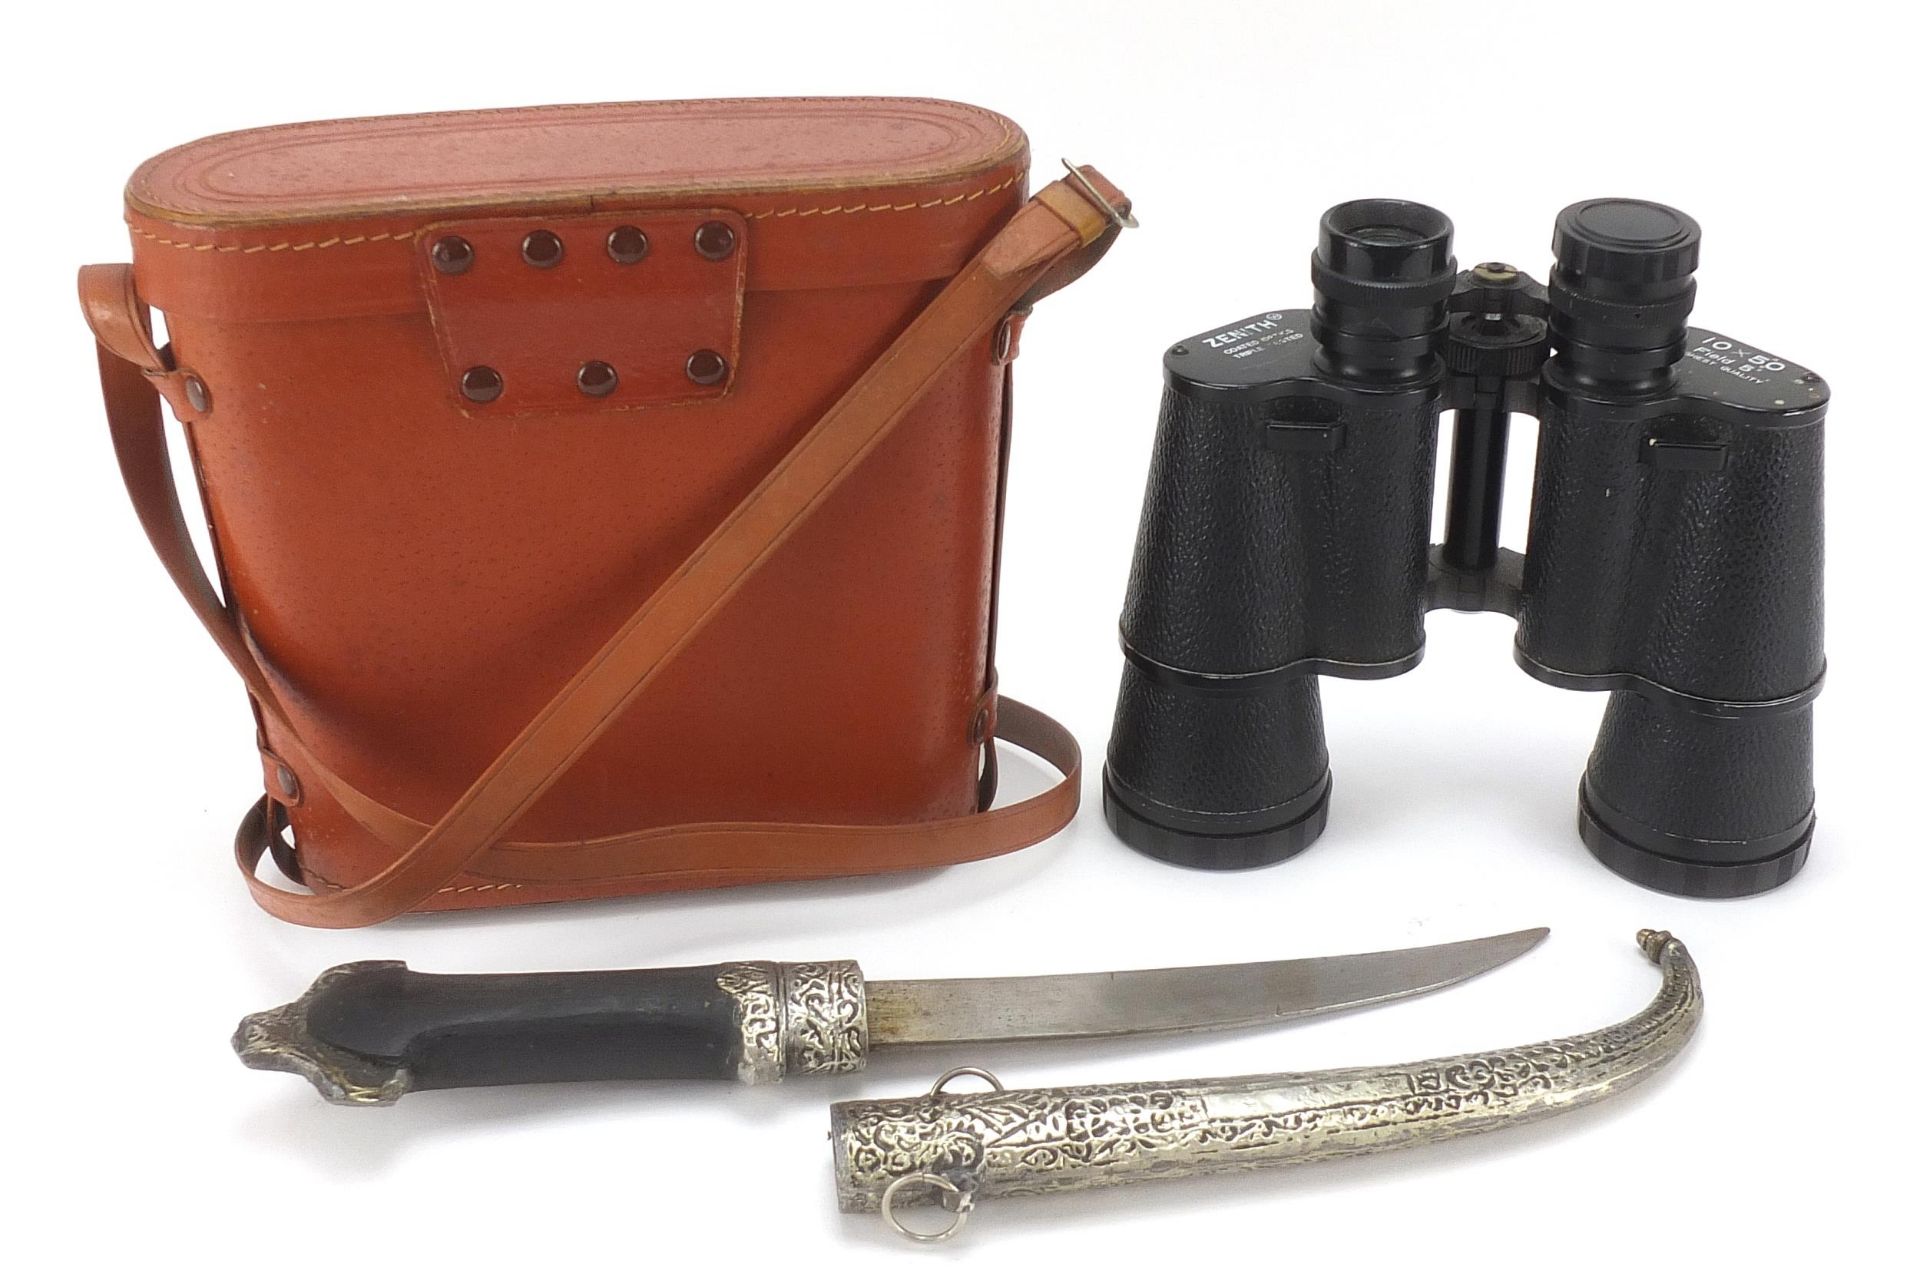 Pair of Zenith 10 x 50 field binoculars with case and an Islamic knife, the largest 37.5cm in length - Image 2 of 3